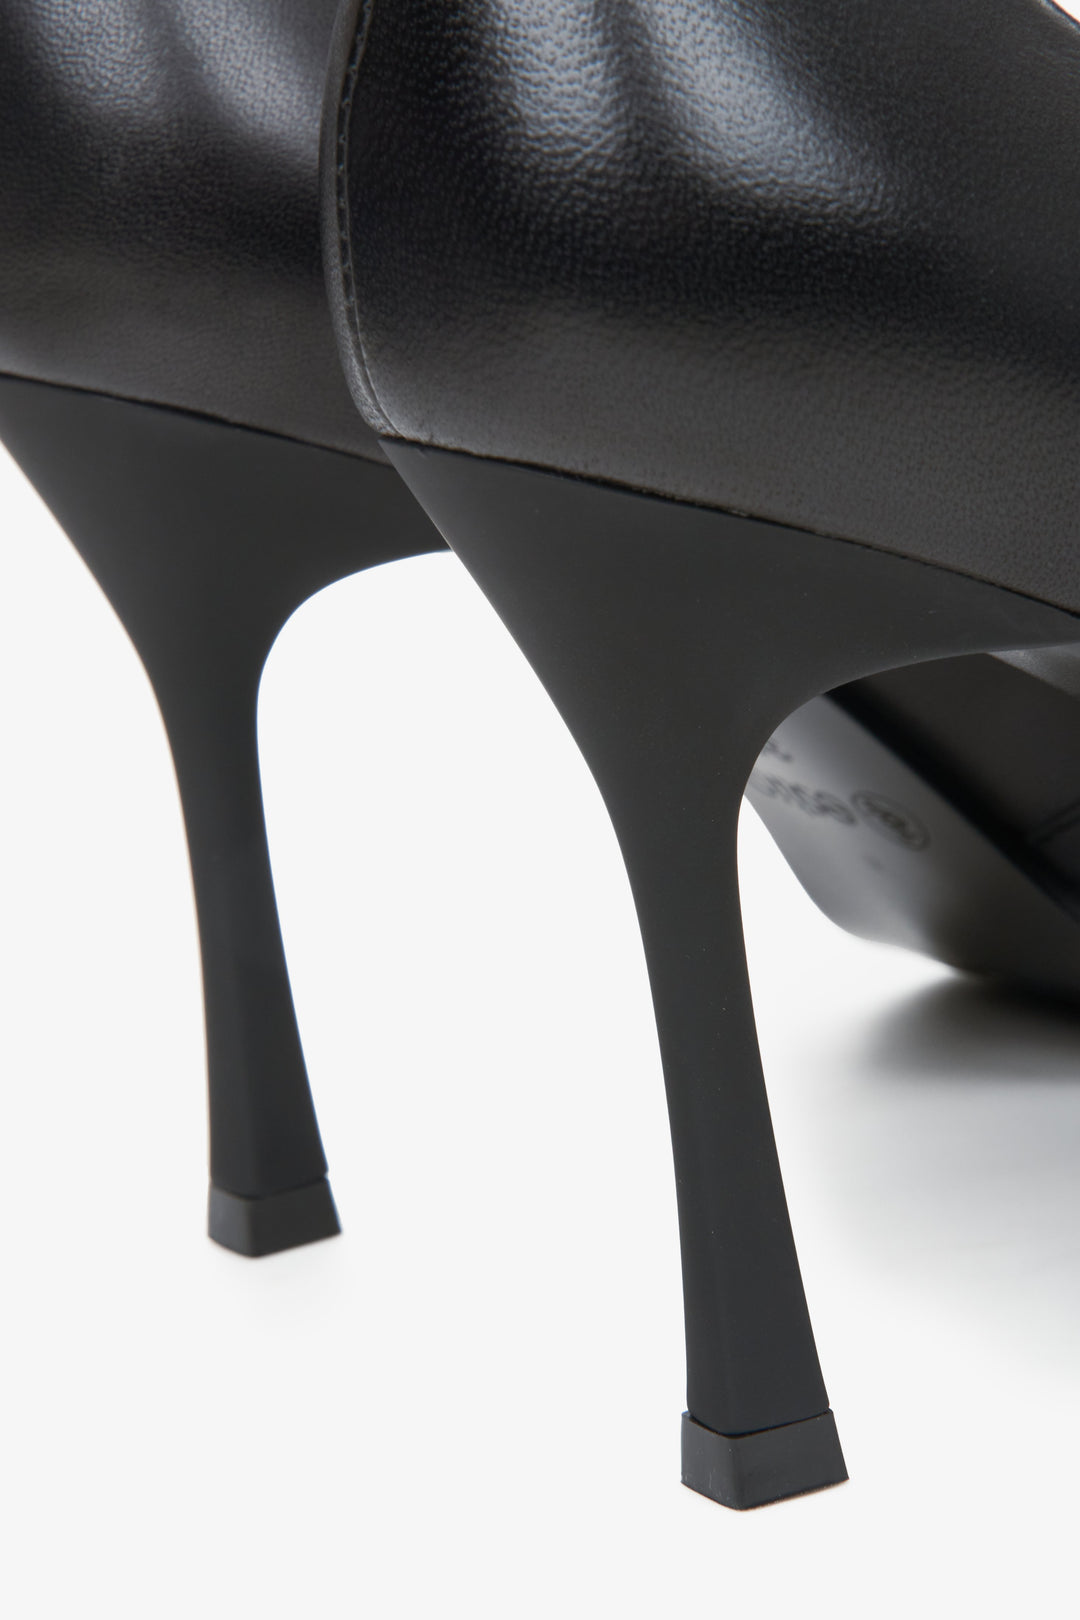 Women's black heels by Estro - close-up on the back and side of the shoe.